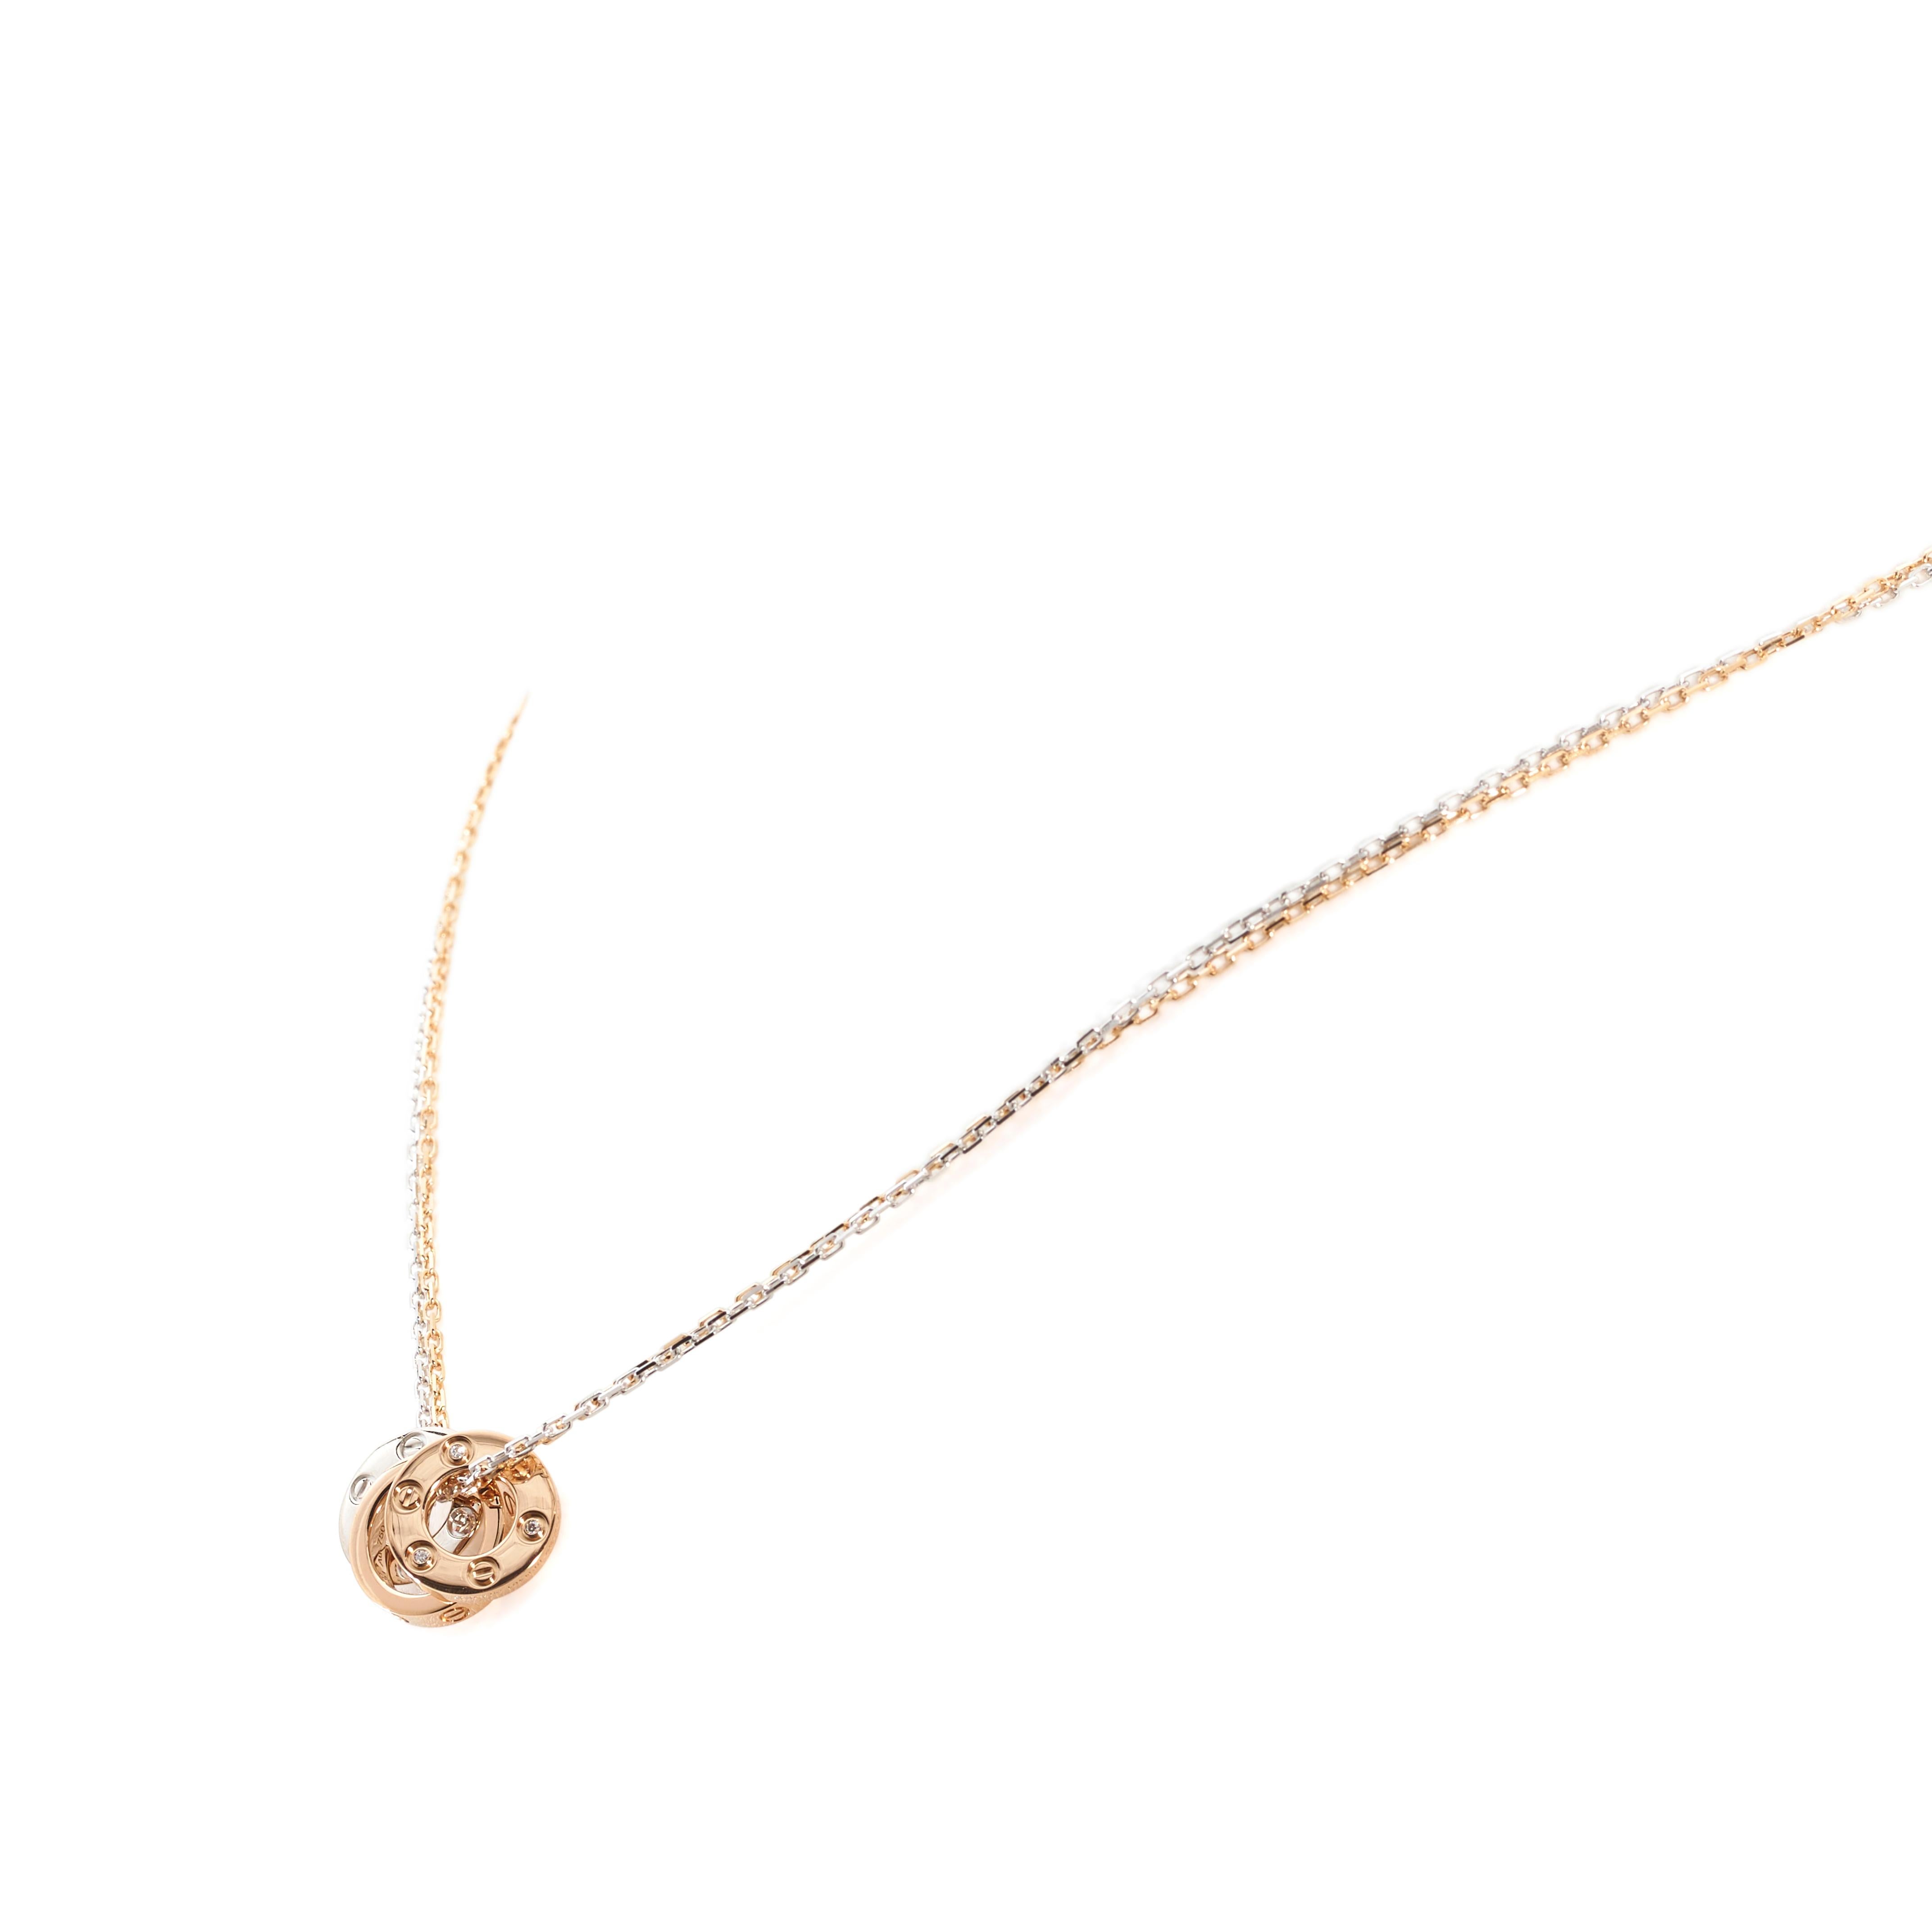 Authentic Cartier Love necklace comprised of a delicate double chain crafted in 18 karat rose and white gold.  Three Love charms are situated on the chain to complete the look.  The two mini circle charms, one rose gold and one white gold, are each